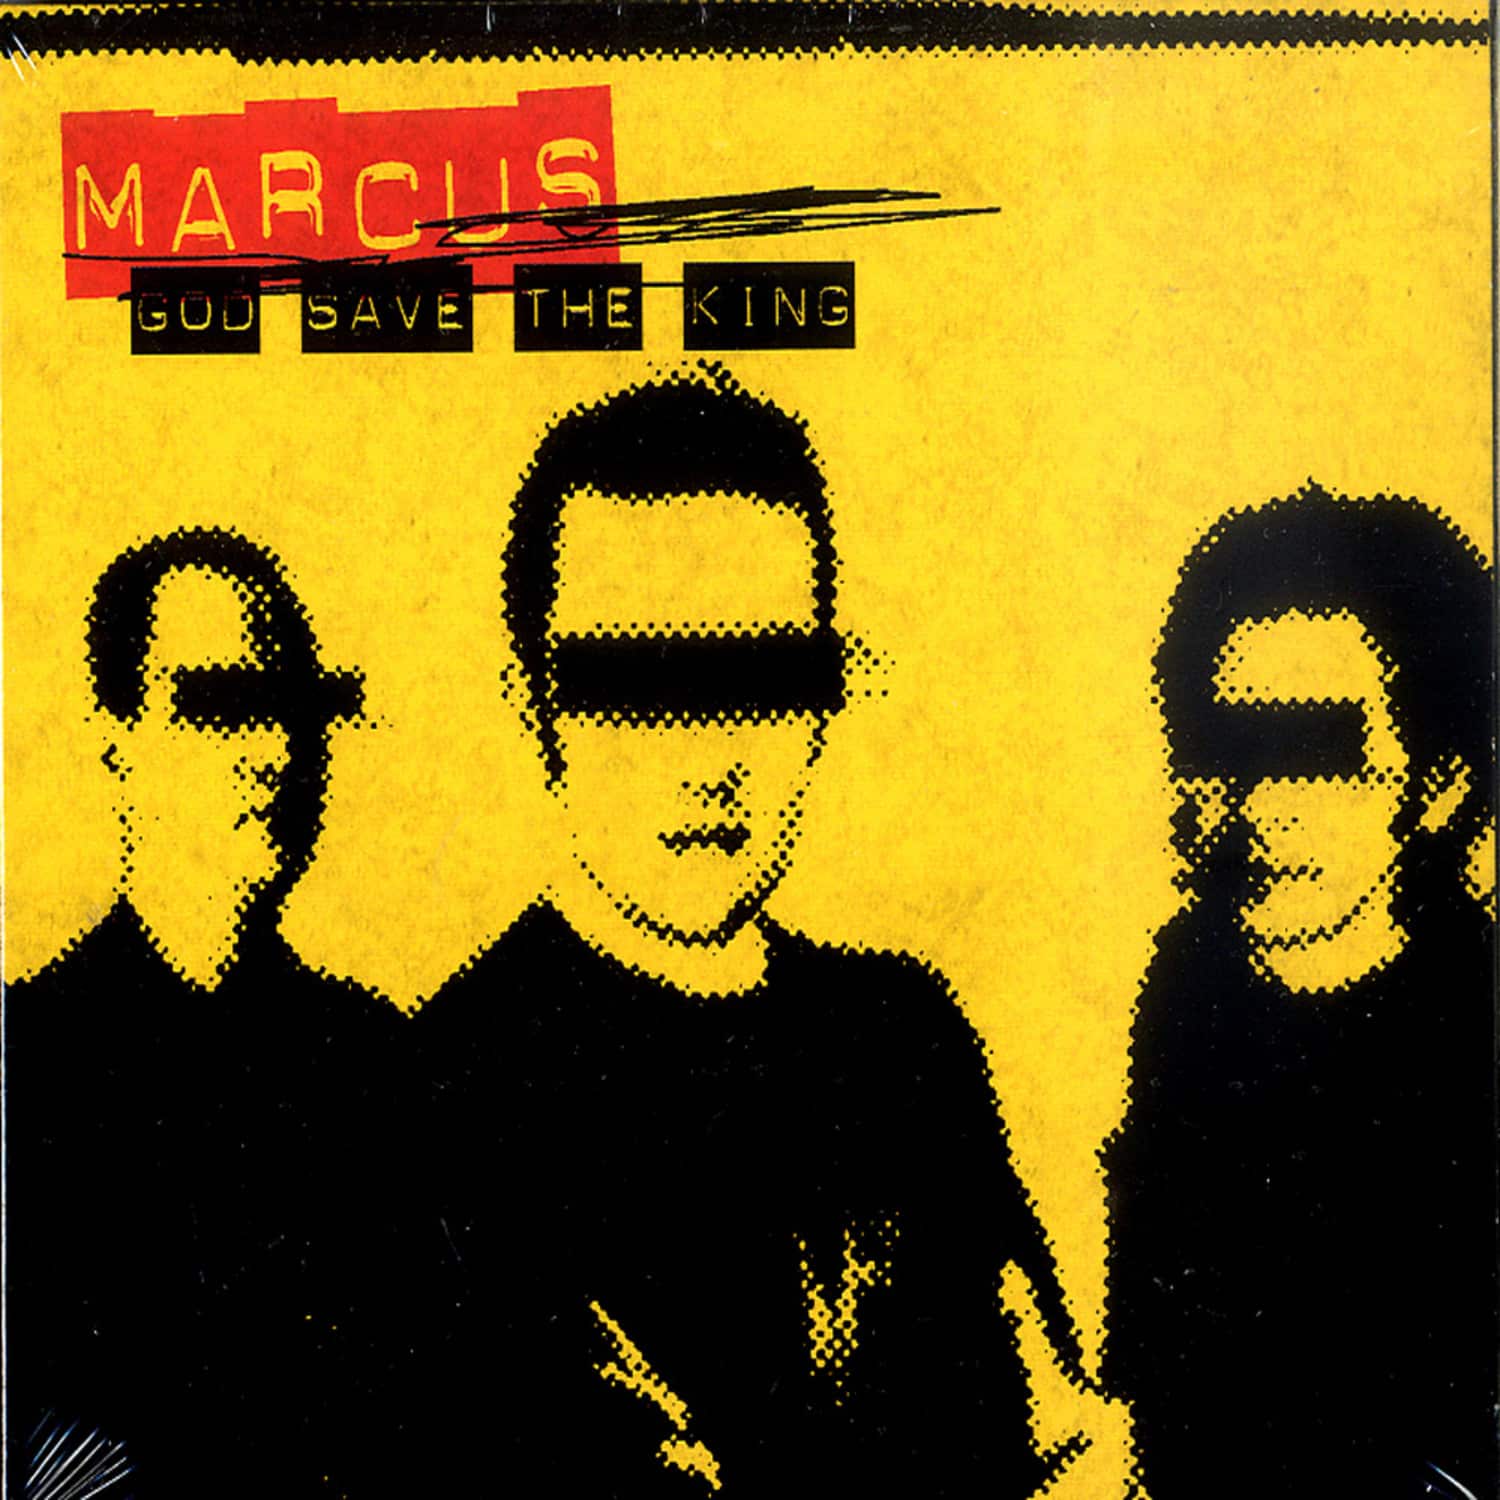 Marcus - GOD SAVE THE KING 